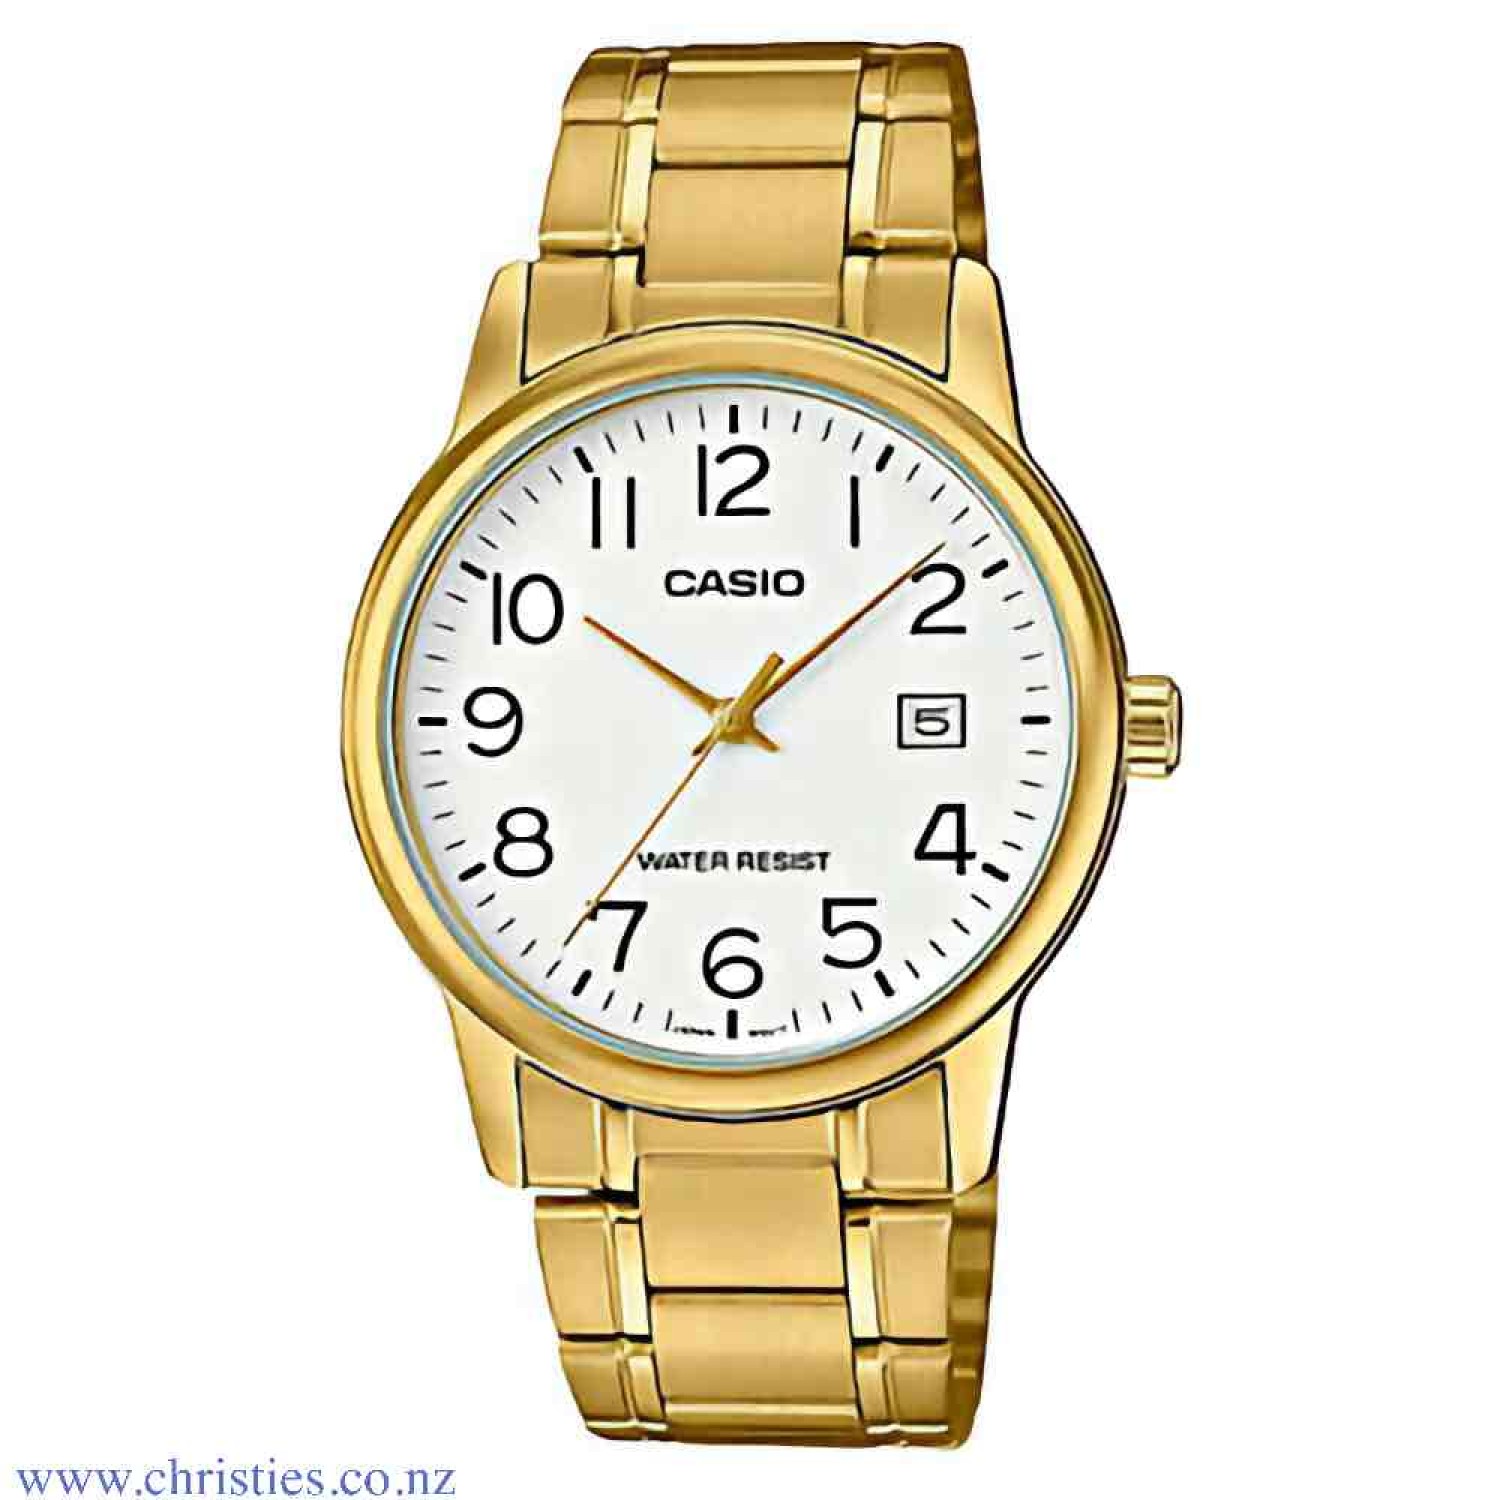 MTPV002G-7B2 Casio Mens Stainless Steel Watch. From Casio an analogue stainless steel with clear easy to read dial and water resistant. Afterpay - Split your purchase into 4 instalments - Pay for your purchase over 4 instalments, due every two weeks. You’